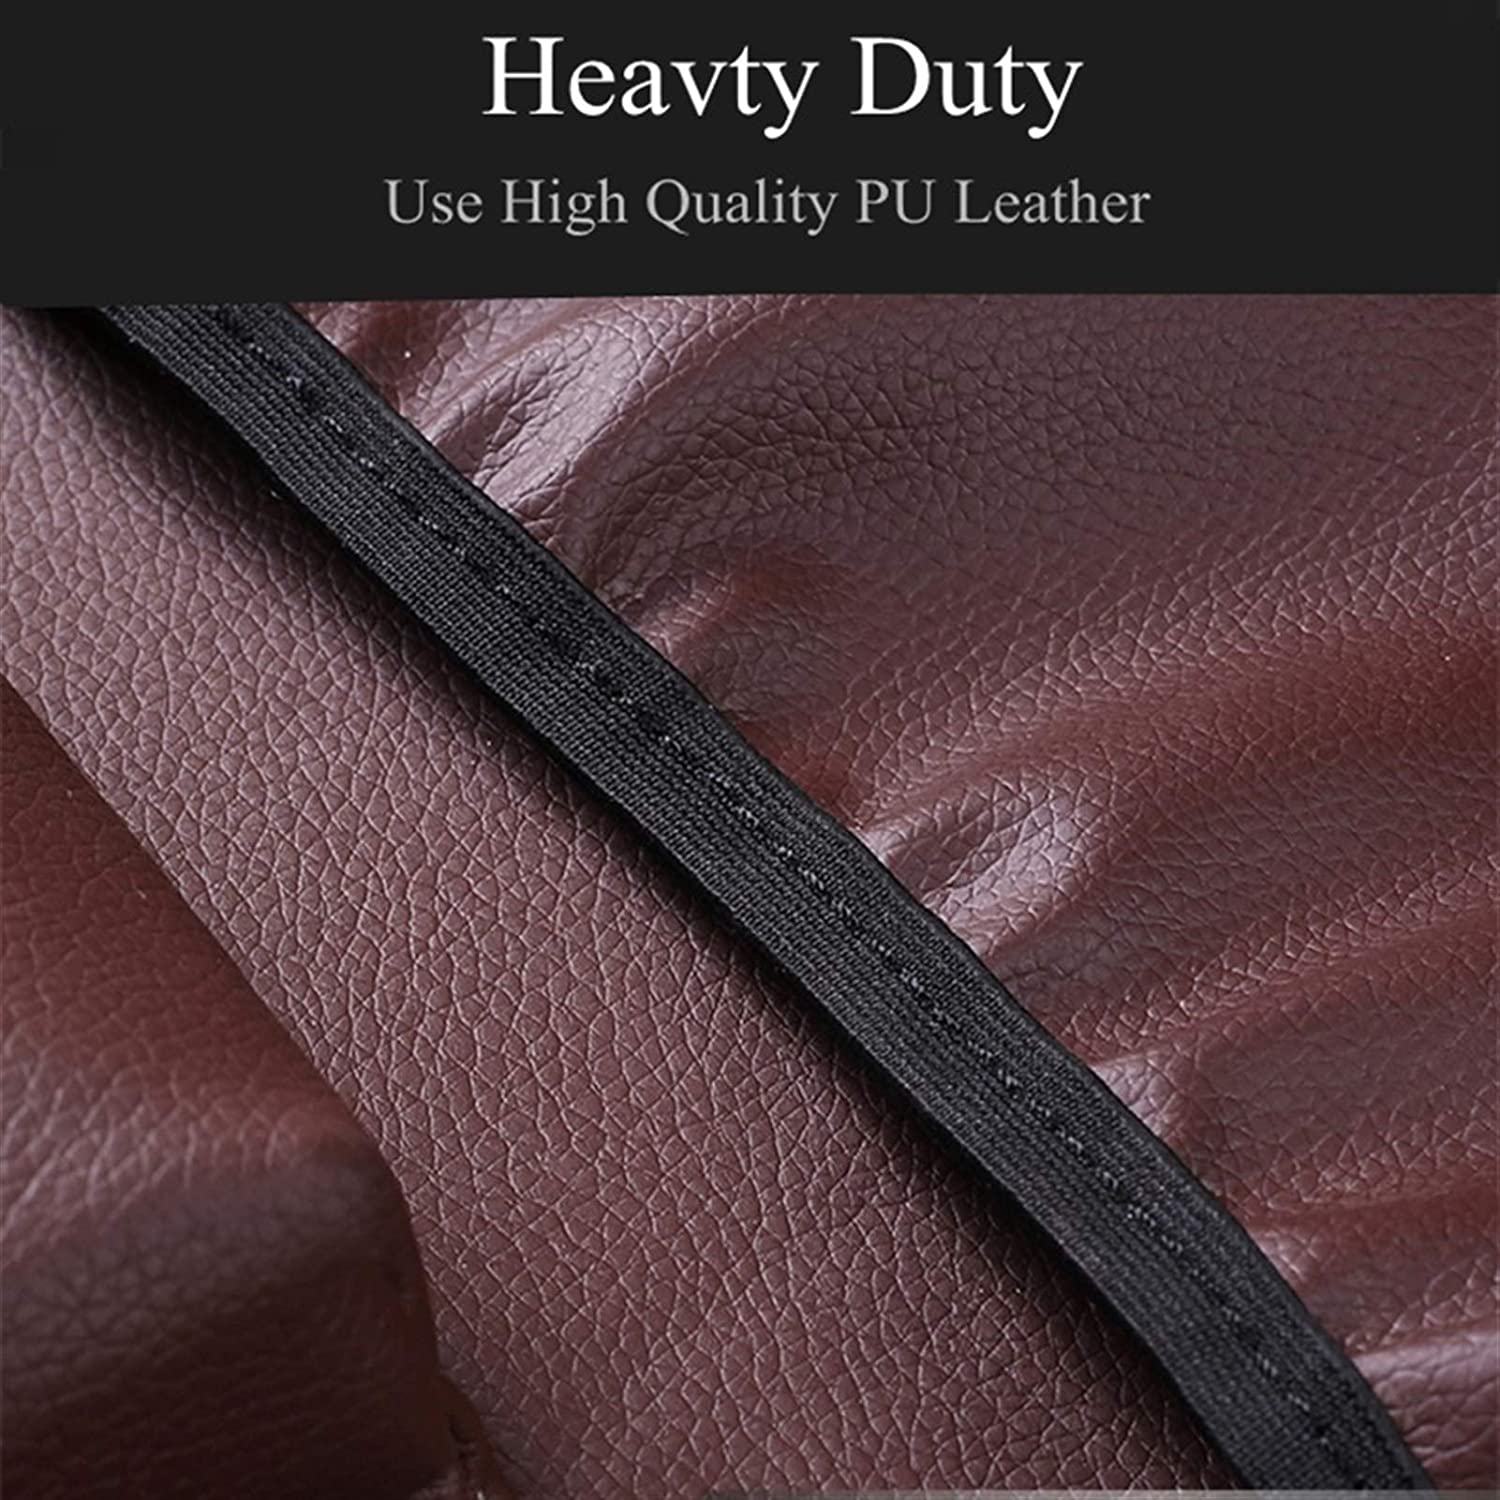 Luxury Leather MultiPocket Seat Back Organizer(🔥Labor Day Hot Sale )